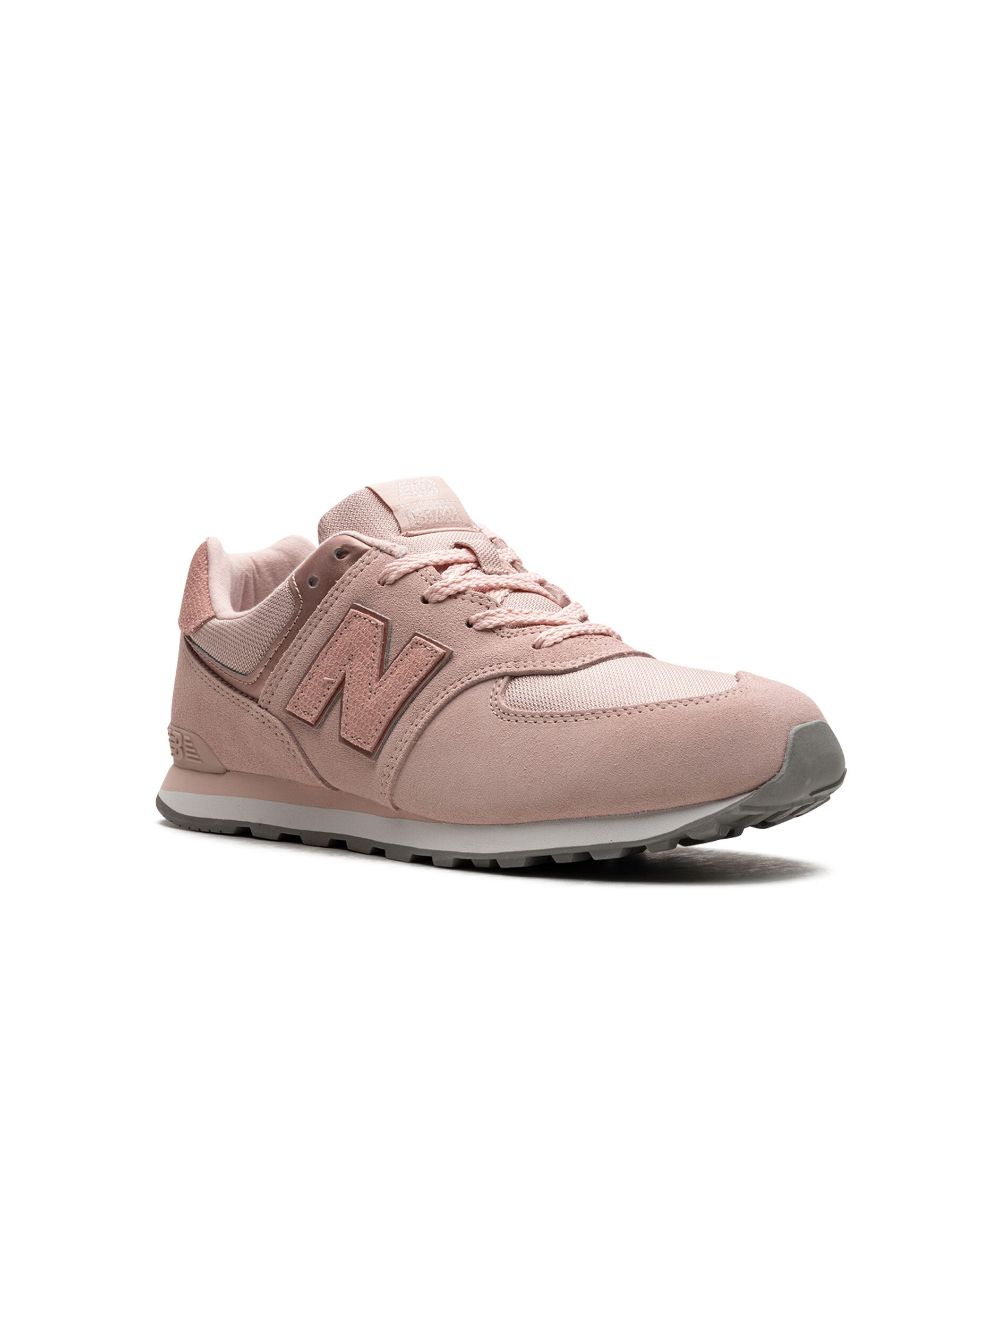 New Balance Kids 574 "Pale Pink" sneakers